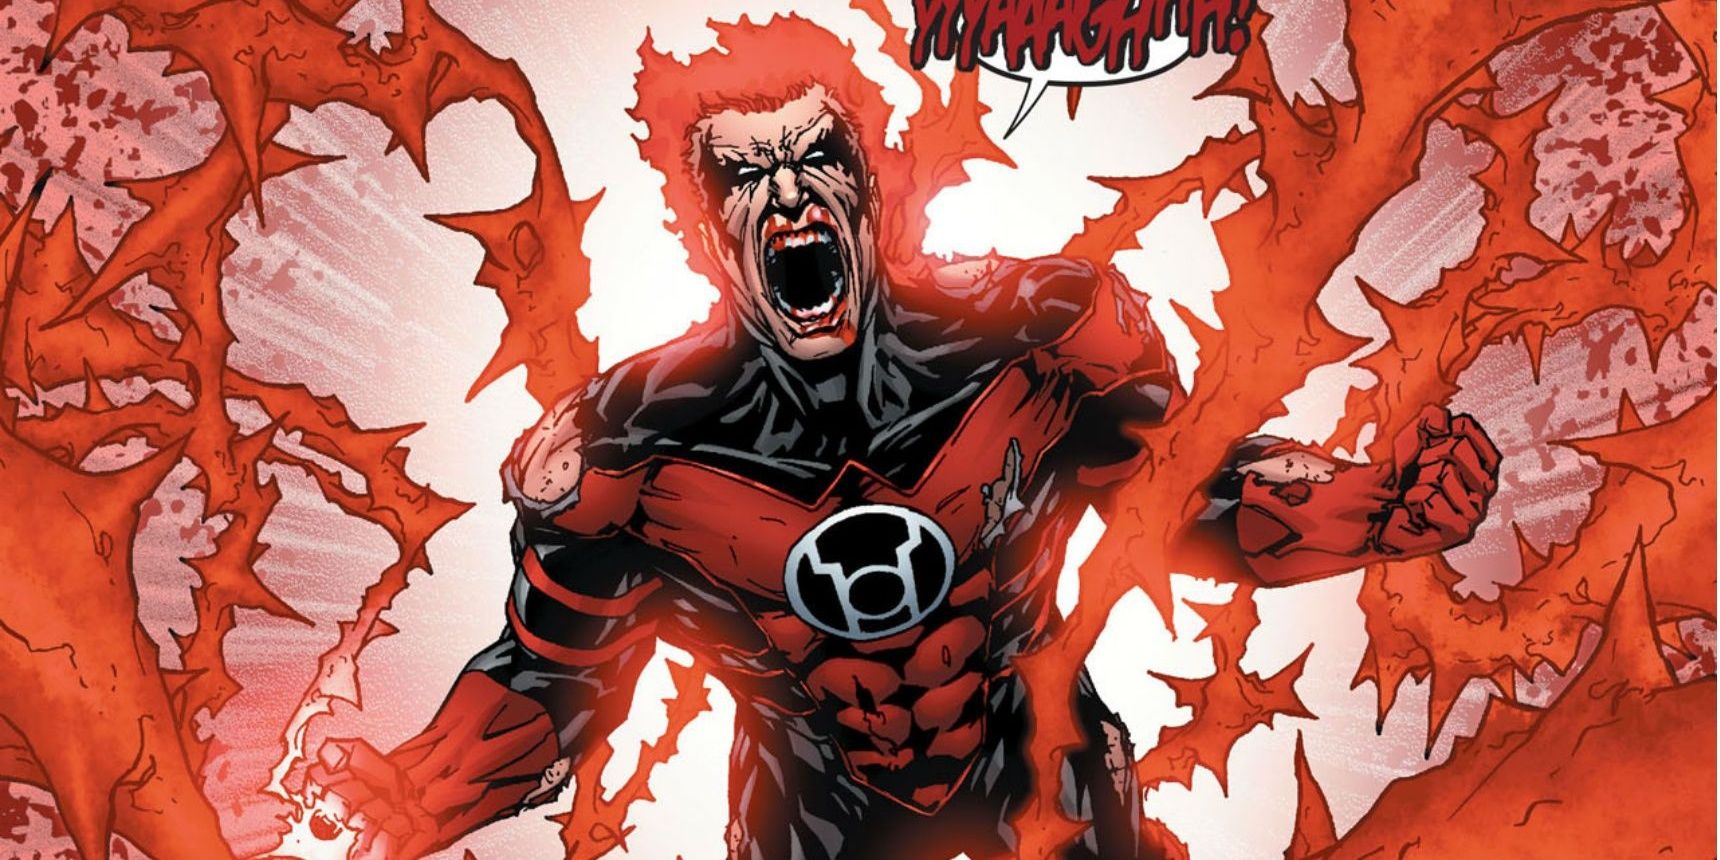 Red lantern in a furious state